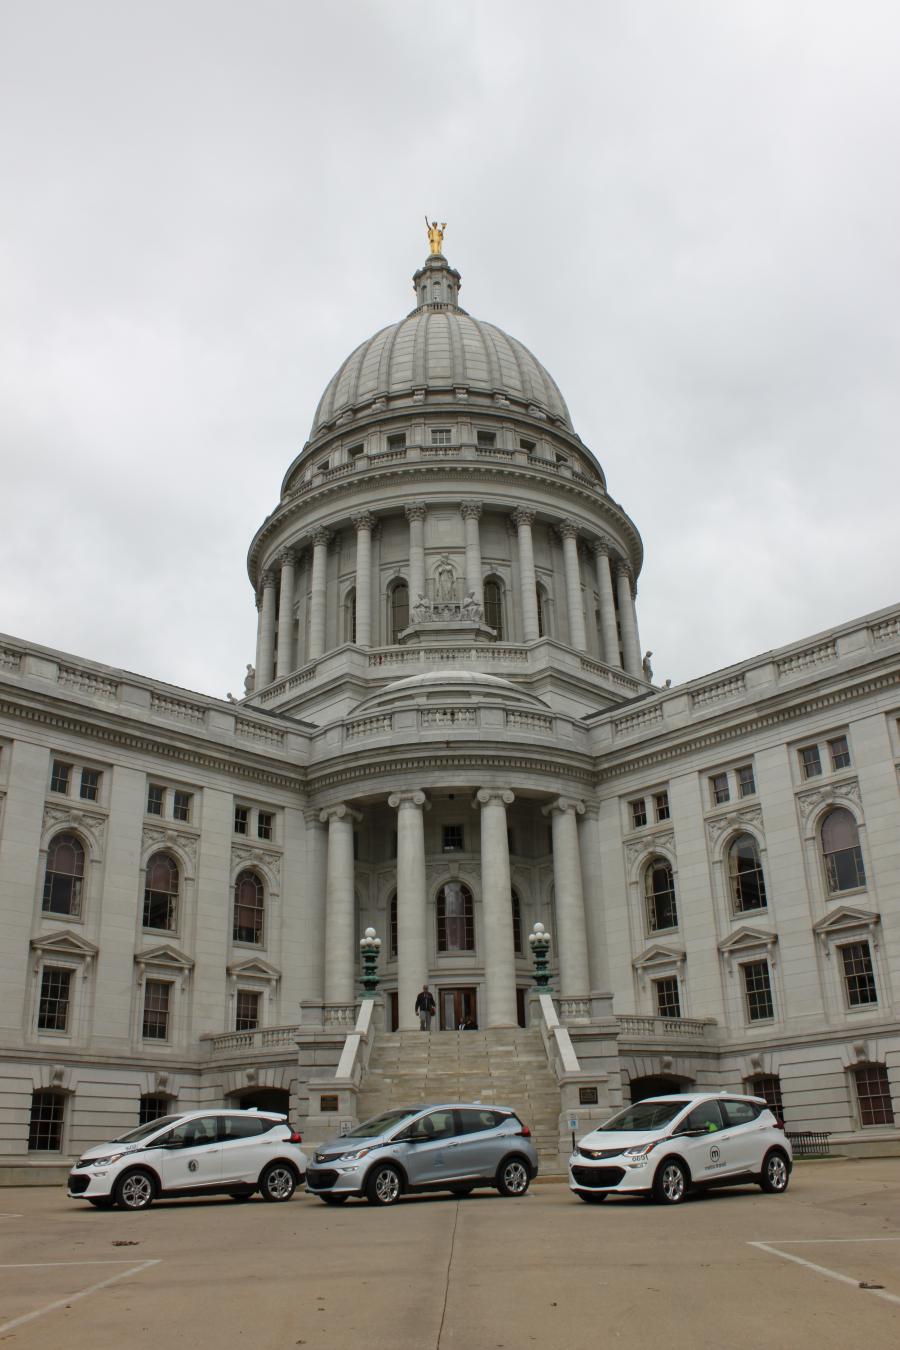 Chevrolet bolts in front of capitol